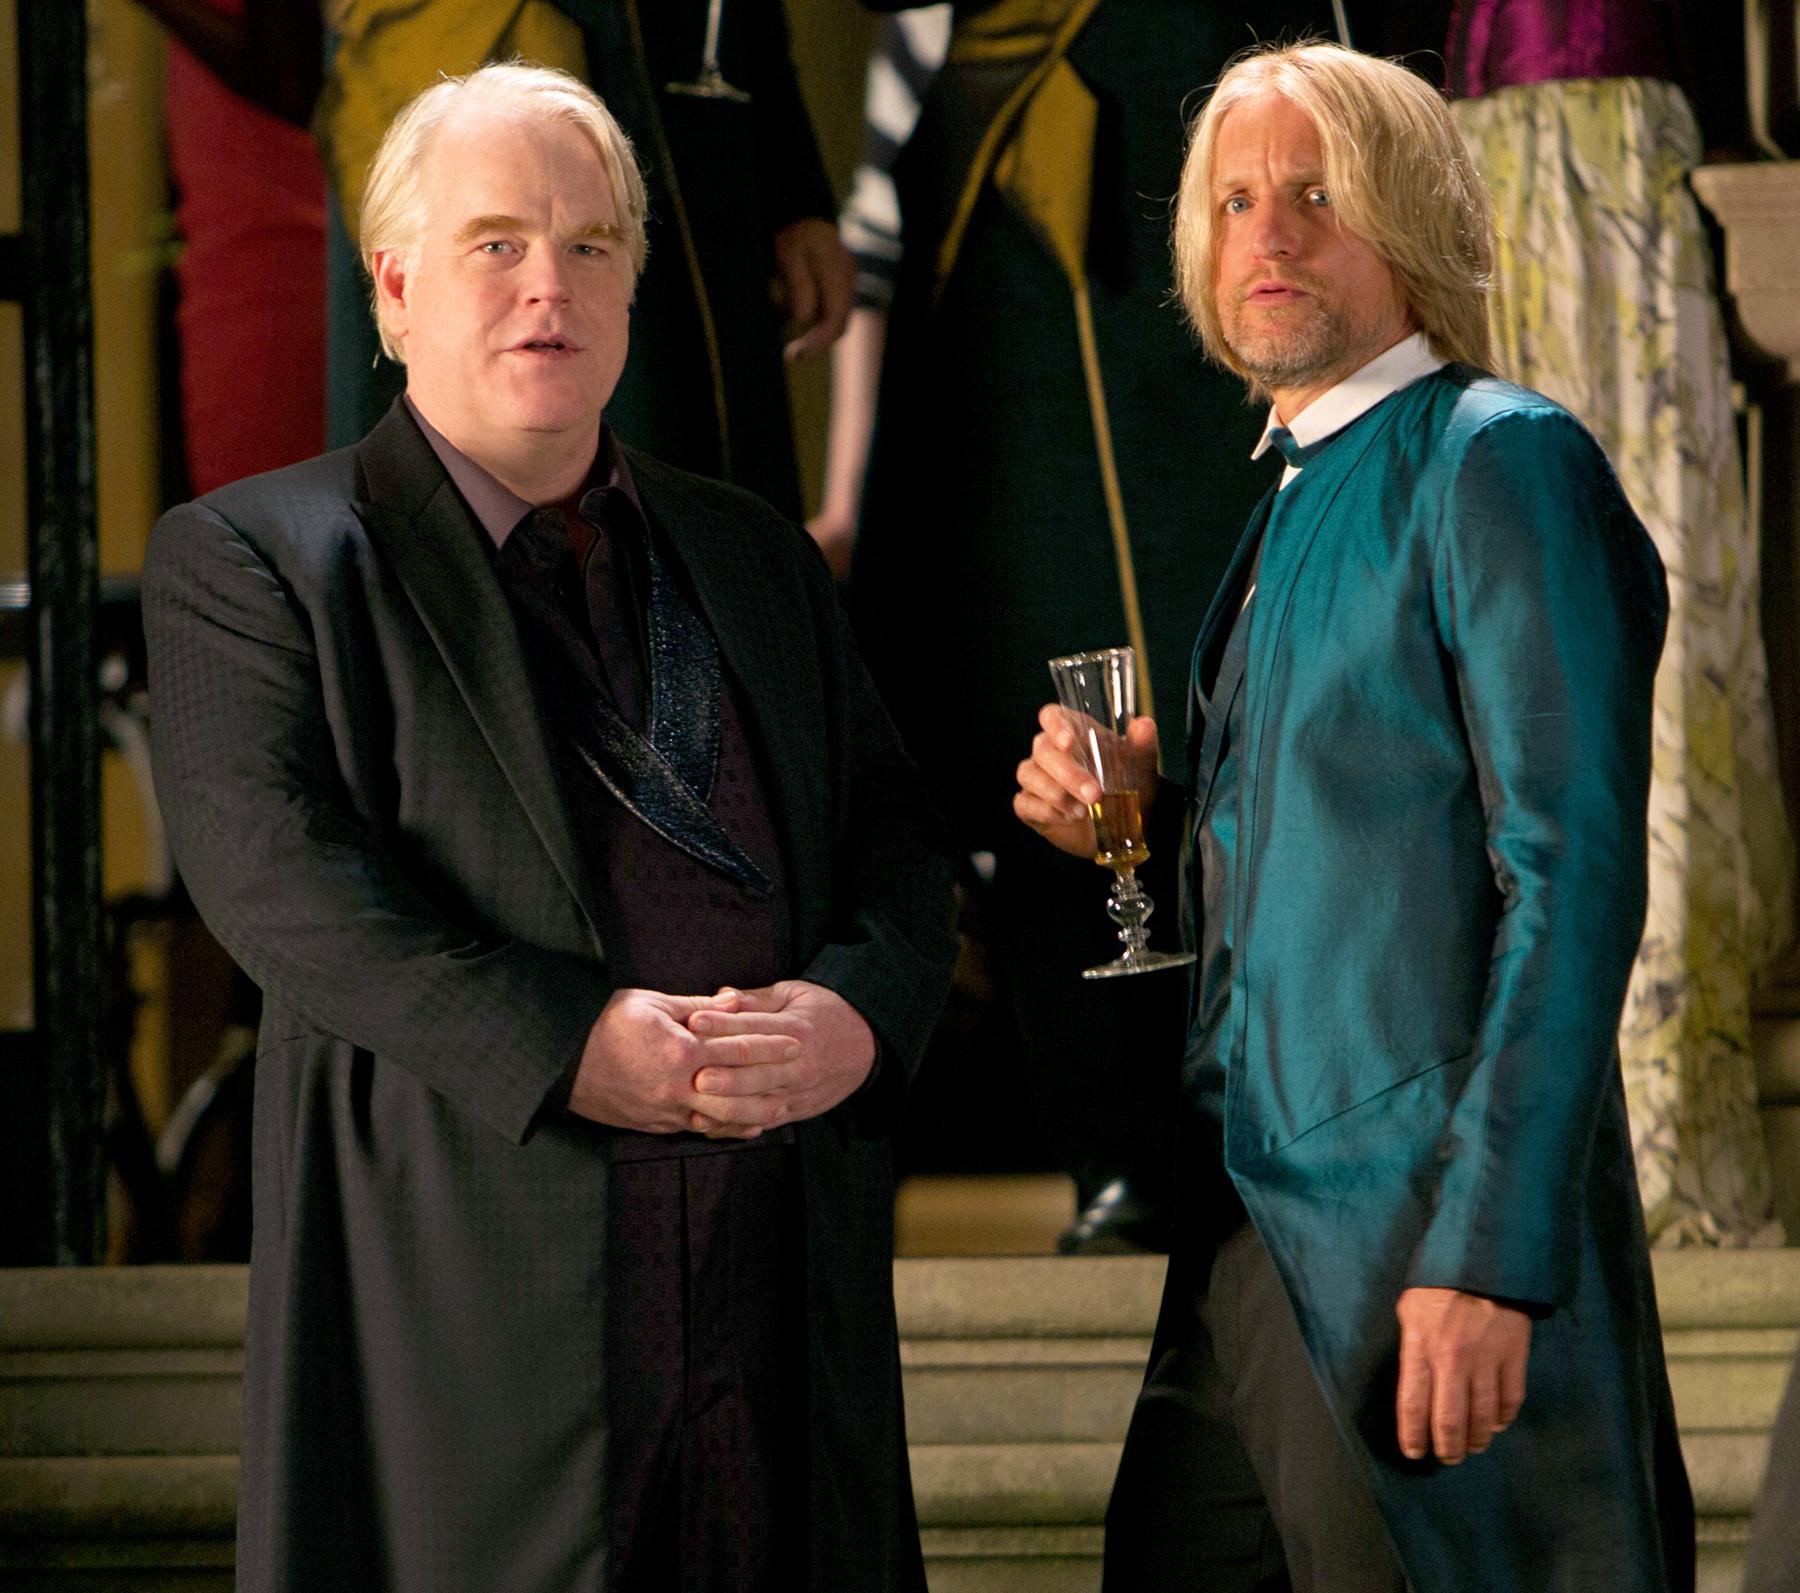 A very special Happy Birthday to our Haymitch, Woody Harrelson and Plutarch, Philip Seymour Hoffman (rest easy).  